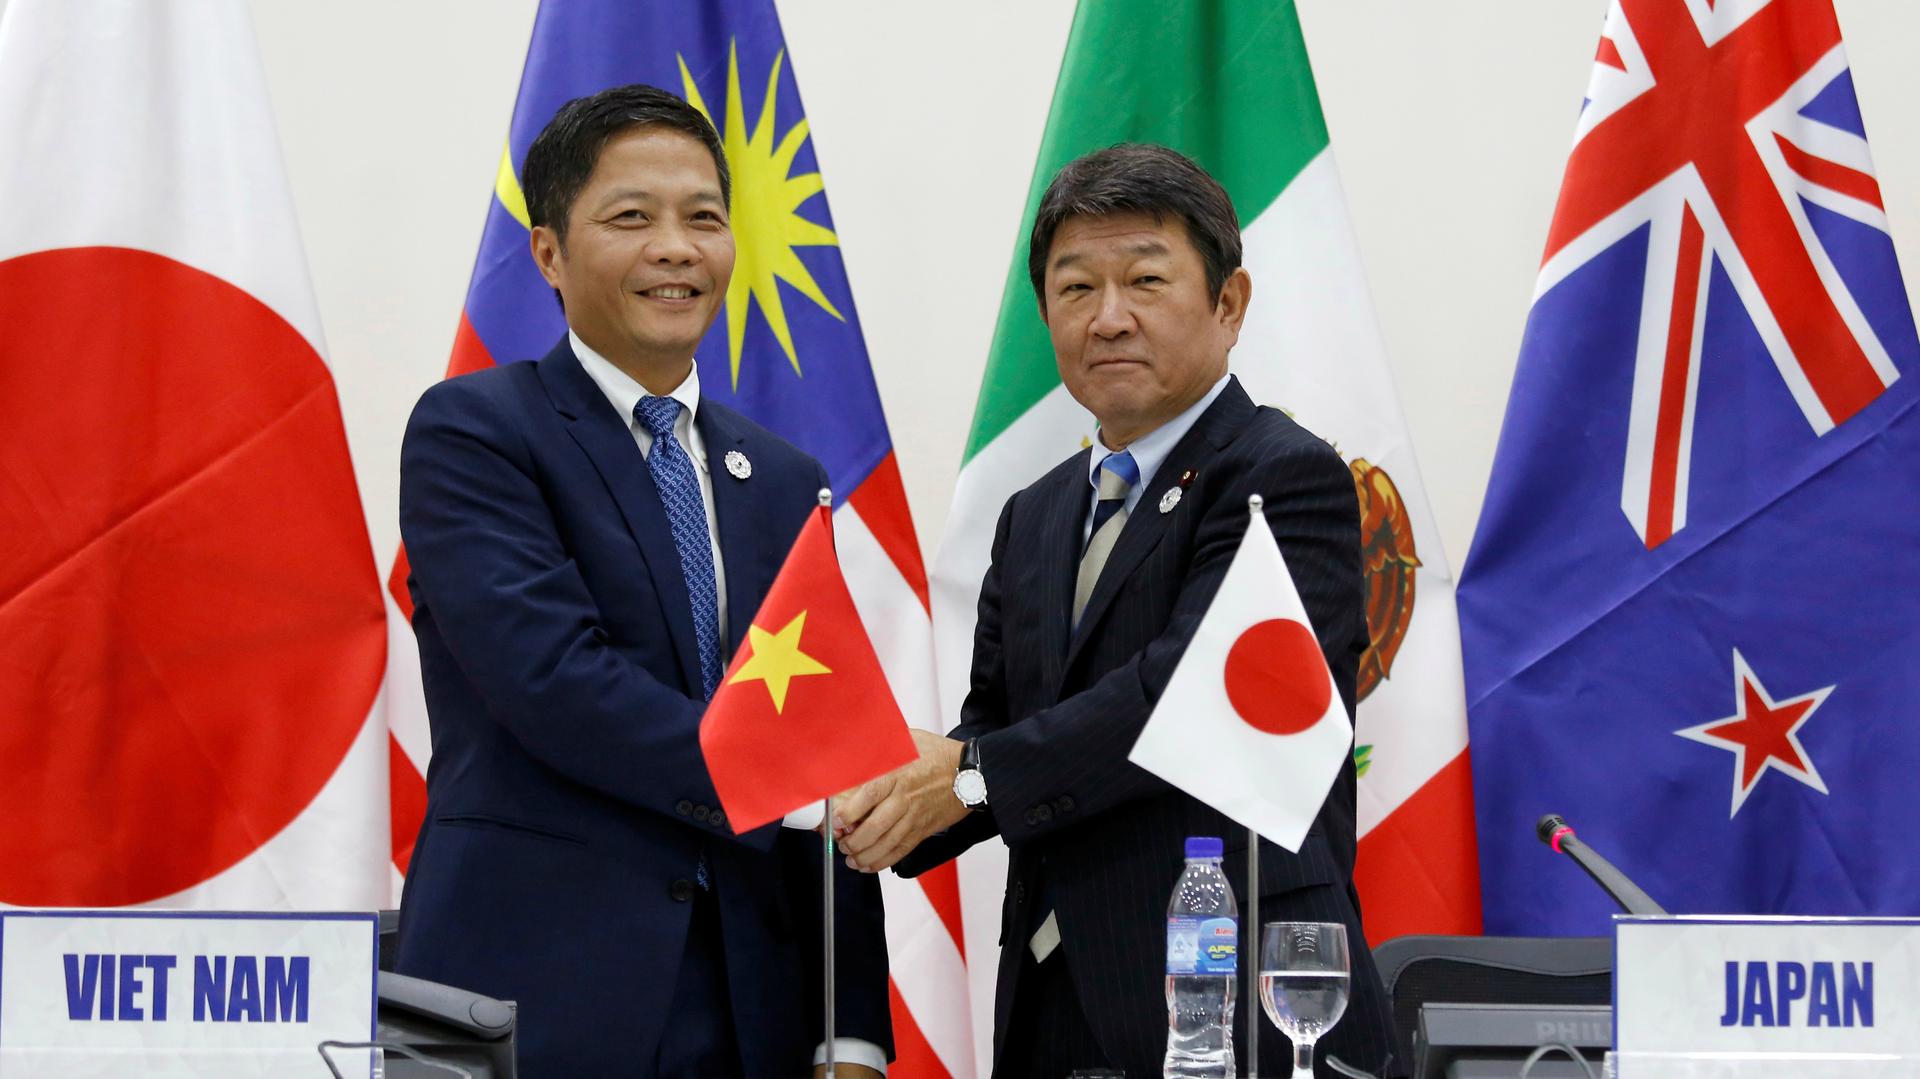 Japan's Minister of Economic Revitalization Toshimitsu Motegi, right, and Vietnam's Industry and Trade Minister Tran Tuan Anh shake hands after they attended a news conference on the Trans Pacific Partnership (TPP) Ministerial Meeting during APEC 2017 in